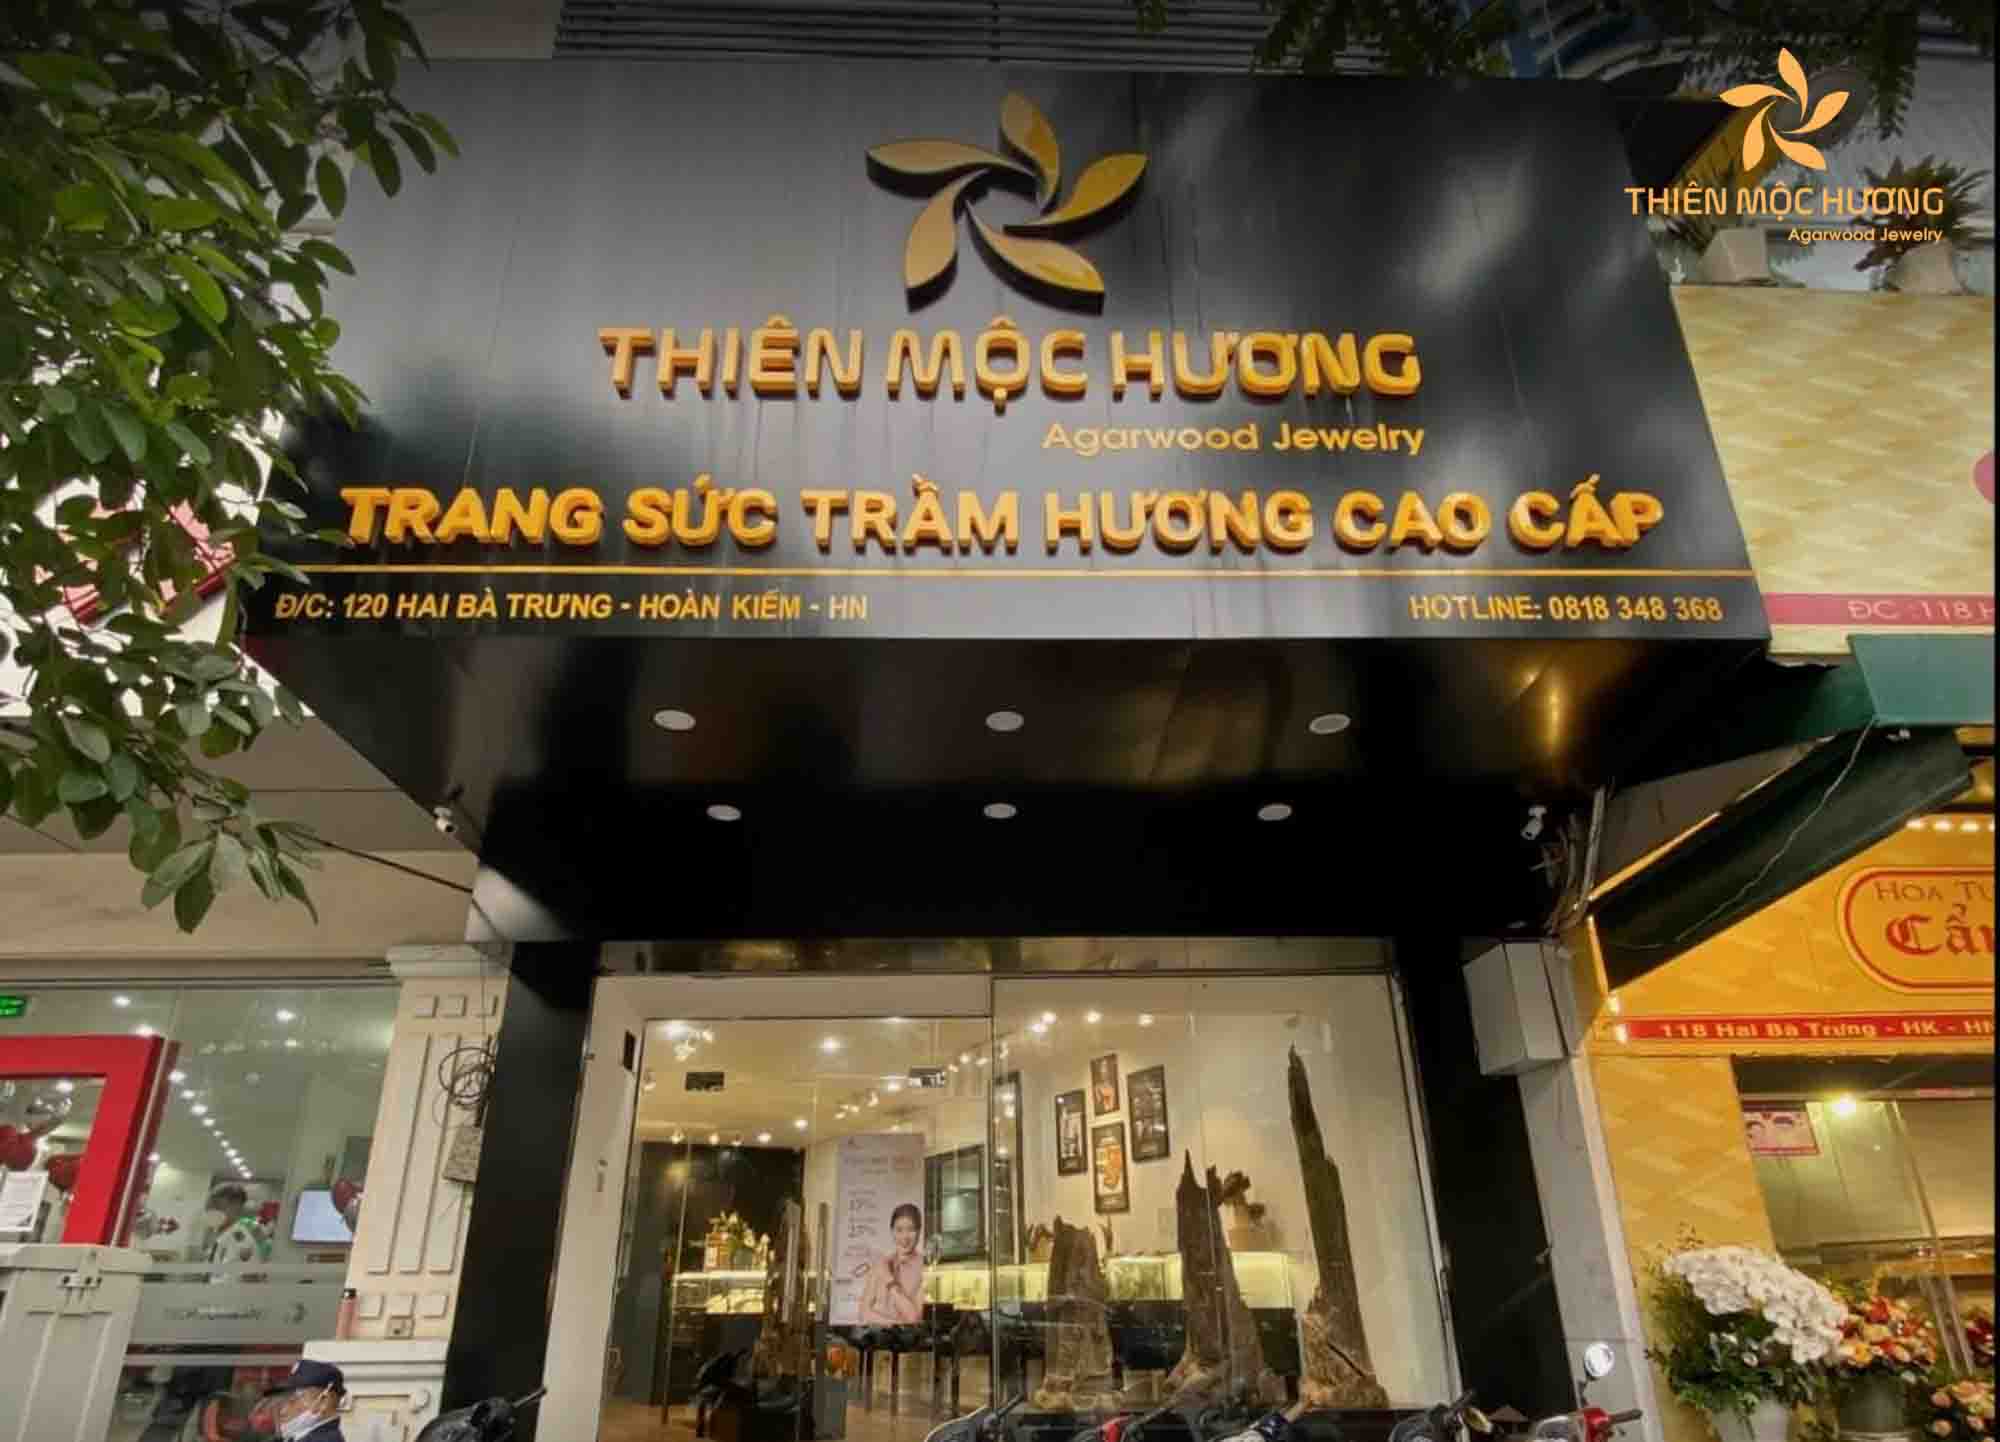 Thien Moc Huong - Best store to buy agarwood in Hanoi